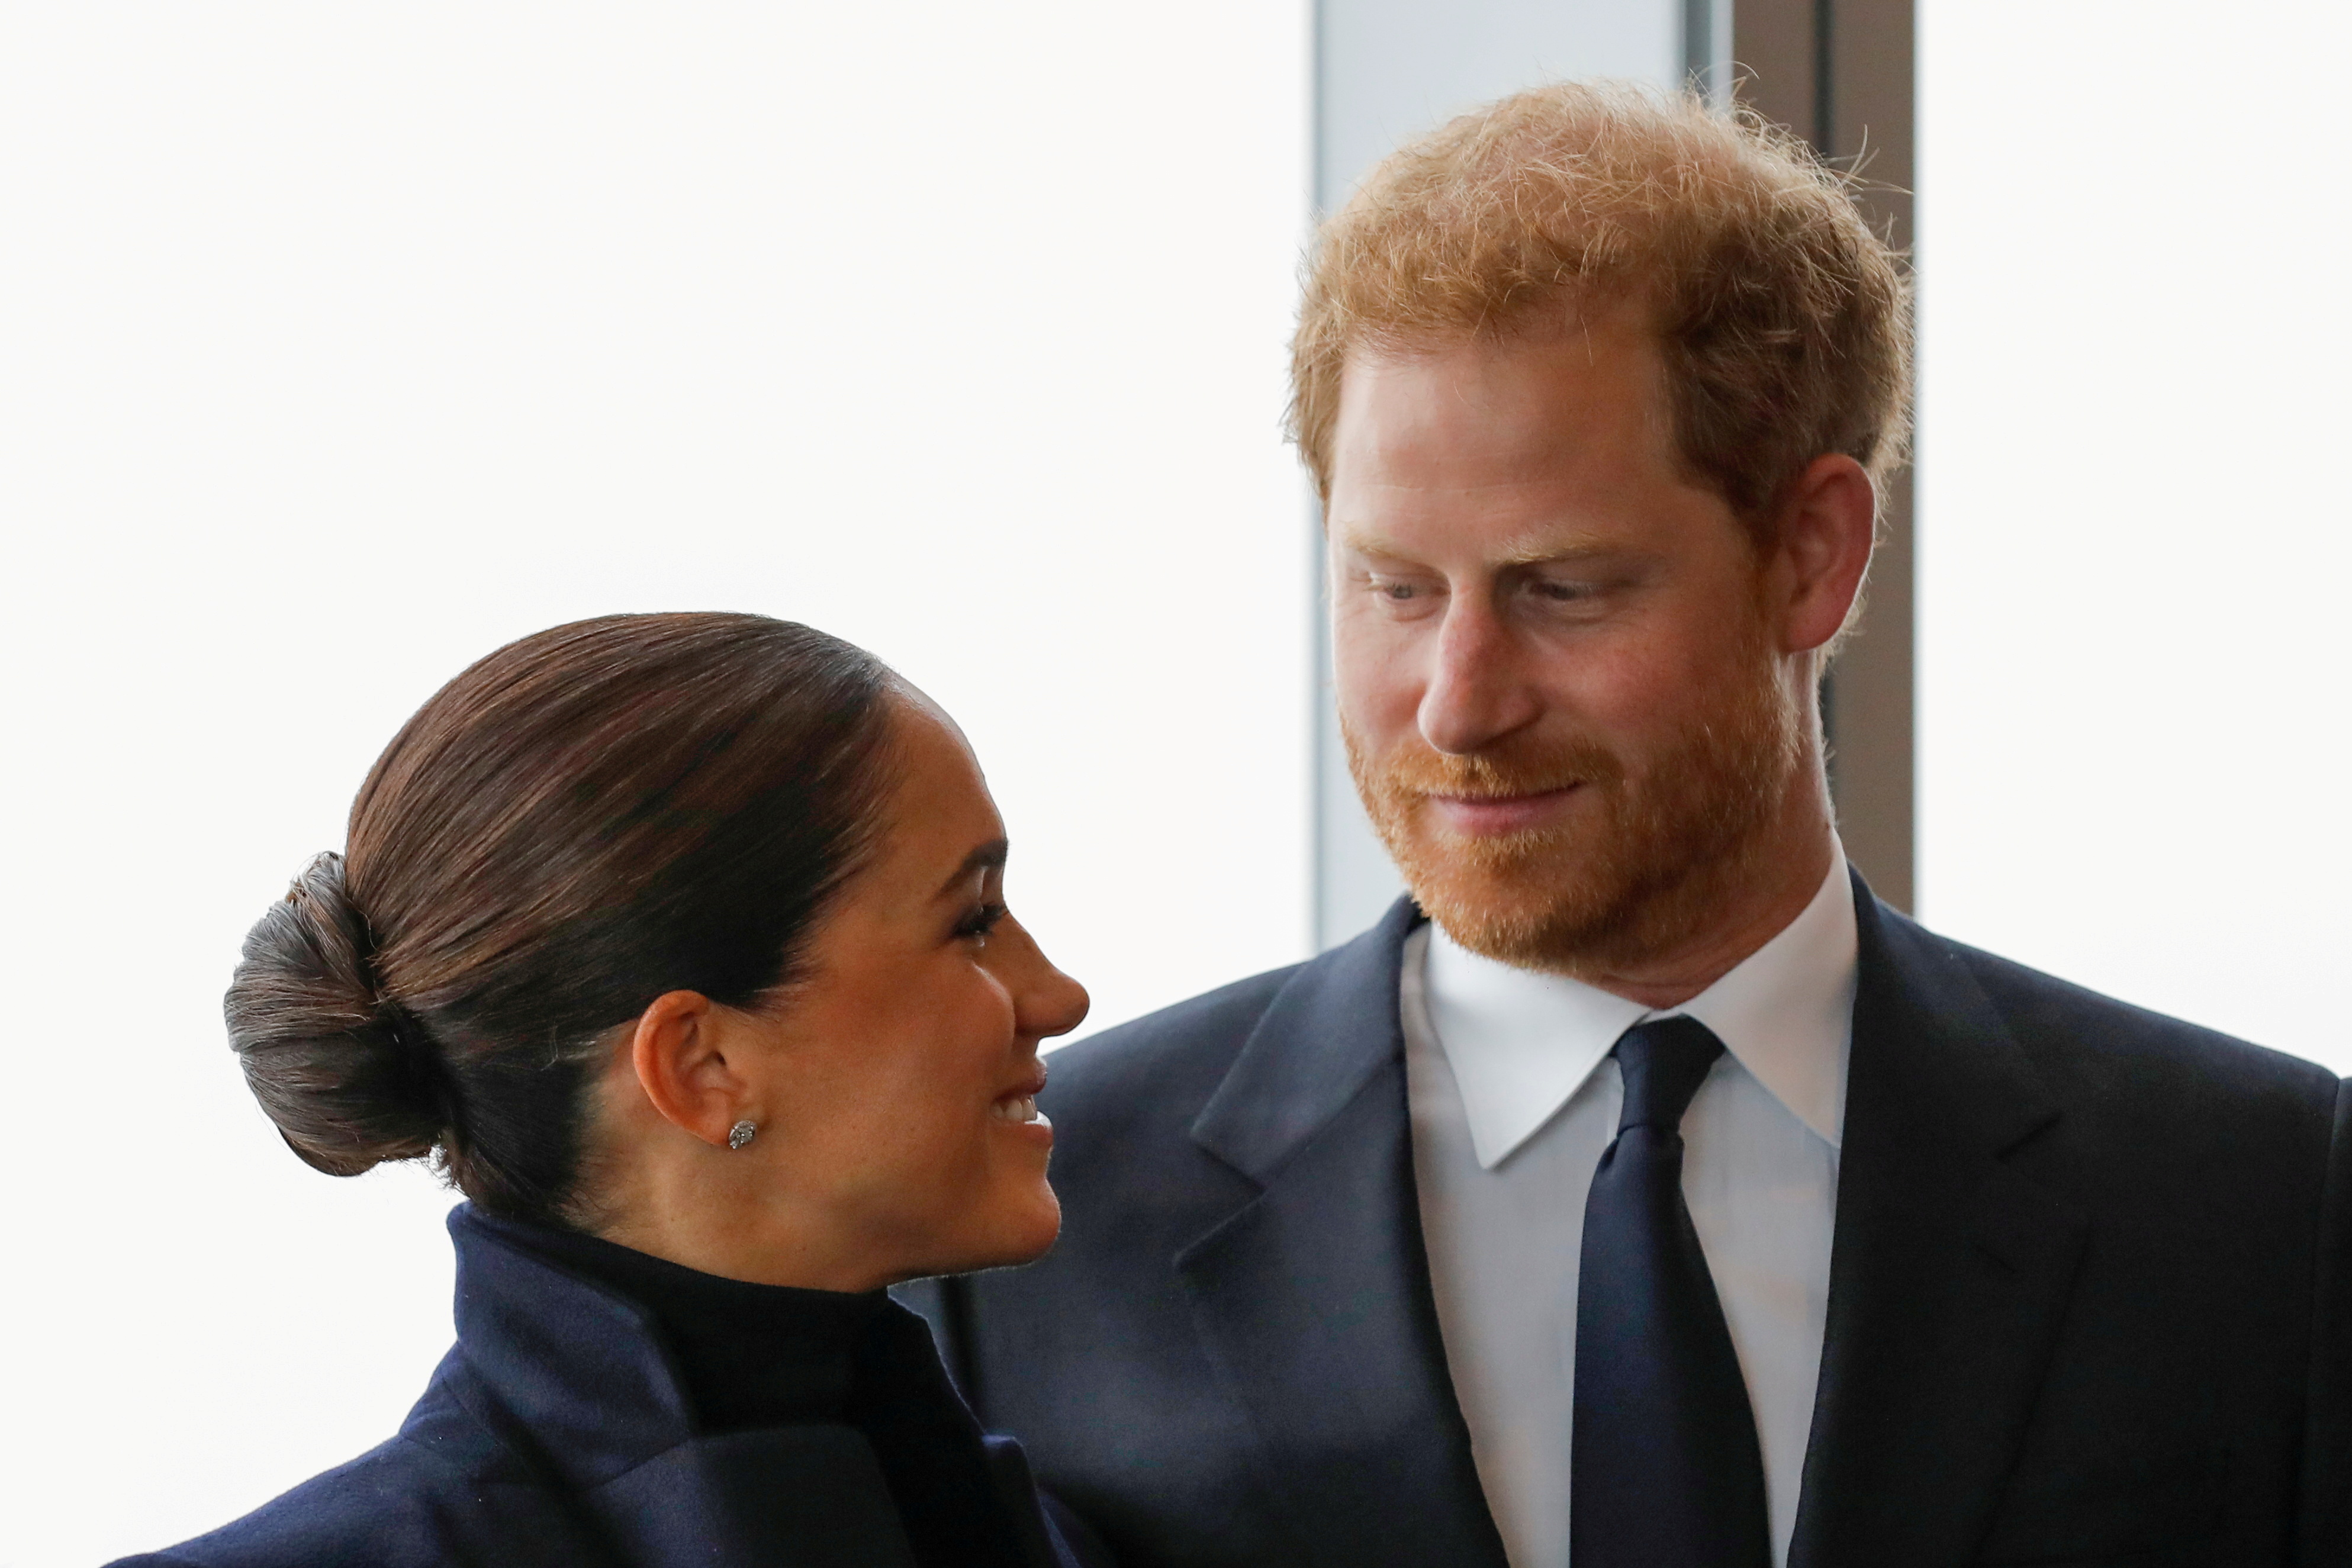 Britain's Prince Harry and Meghan, Duke and Duchess of Sussex, visit One World Trade Center in Manhattan, New York City